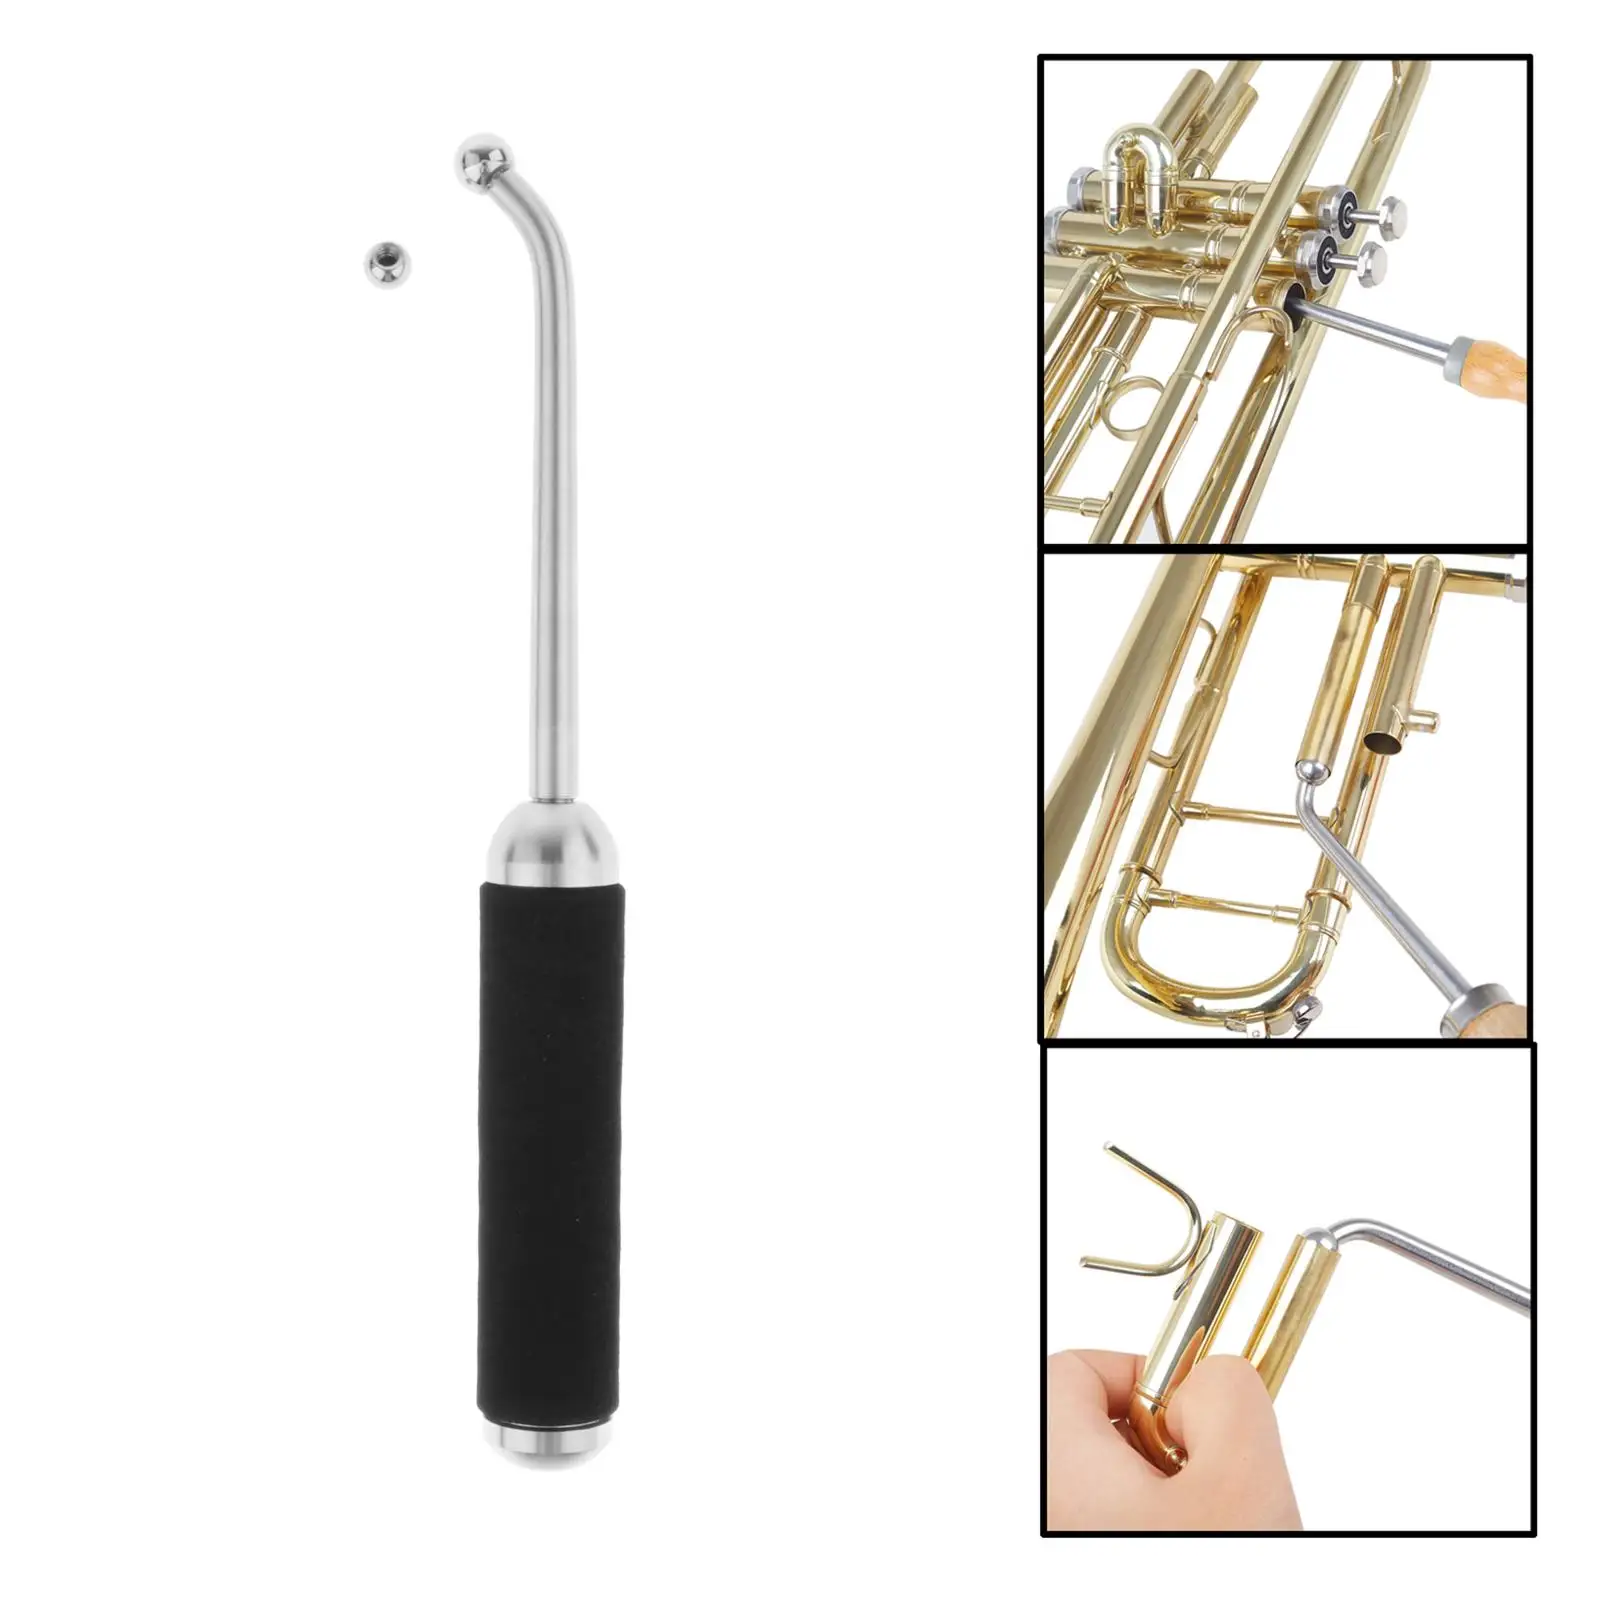 Trumpet Elbow Repair Handle Tools with Metal 2 Balls Accessories Parts Trumpet Maintenance Care for Trumpet French Horn